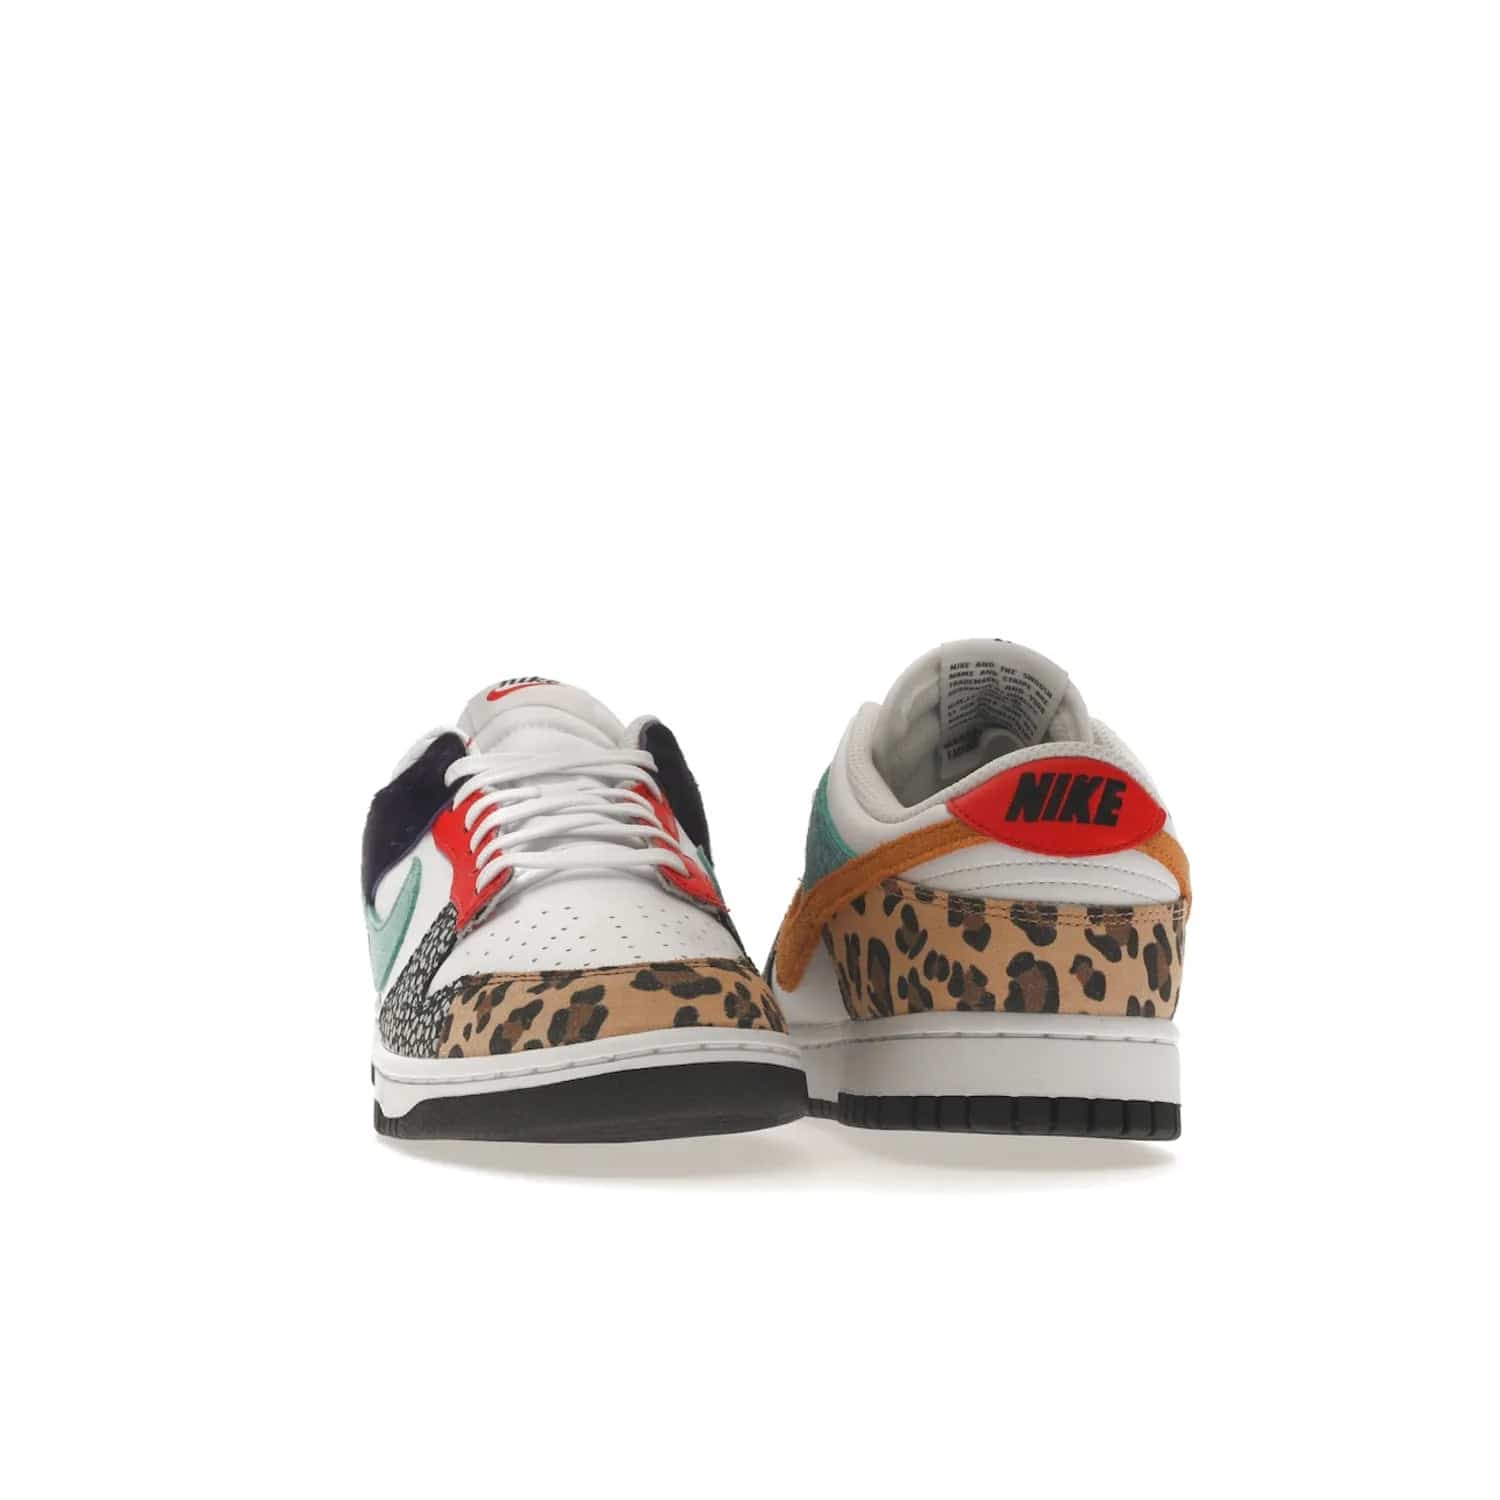 Nike Dunk Low Safari Mix (Women's) - Image 9 - Only at www.BallersClubKickz.com - Express your unique style with the Women’s Nike Dunk Low Safari Mix. Featuring a vibrant mix of white leather, leopard Durabuck, faux-horsehair, suede, and more, this stylish sneaker will turn heads. Shop now for a bold look at an affordable $120 price tag. Available in May 2022.